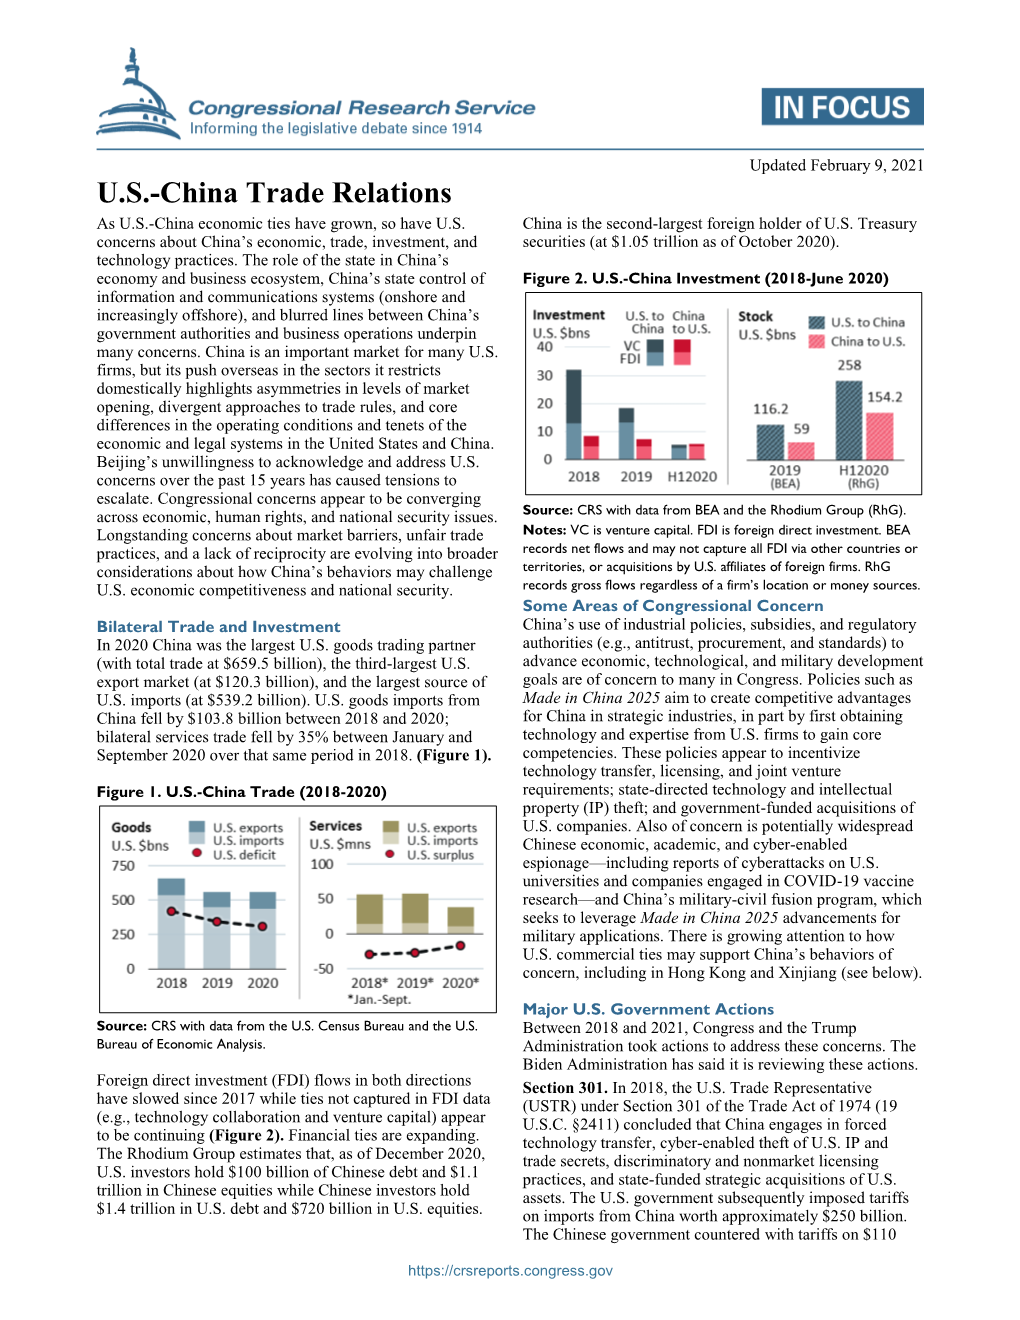 U.S.-China Trade Relations As U.S.-China Economic Ties Have Grown, So Have U.S